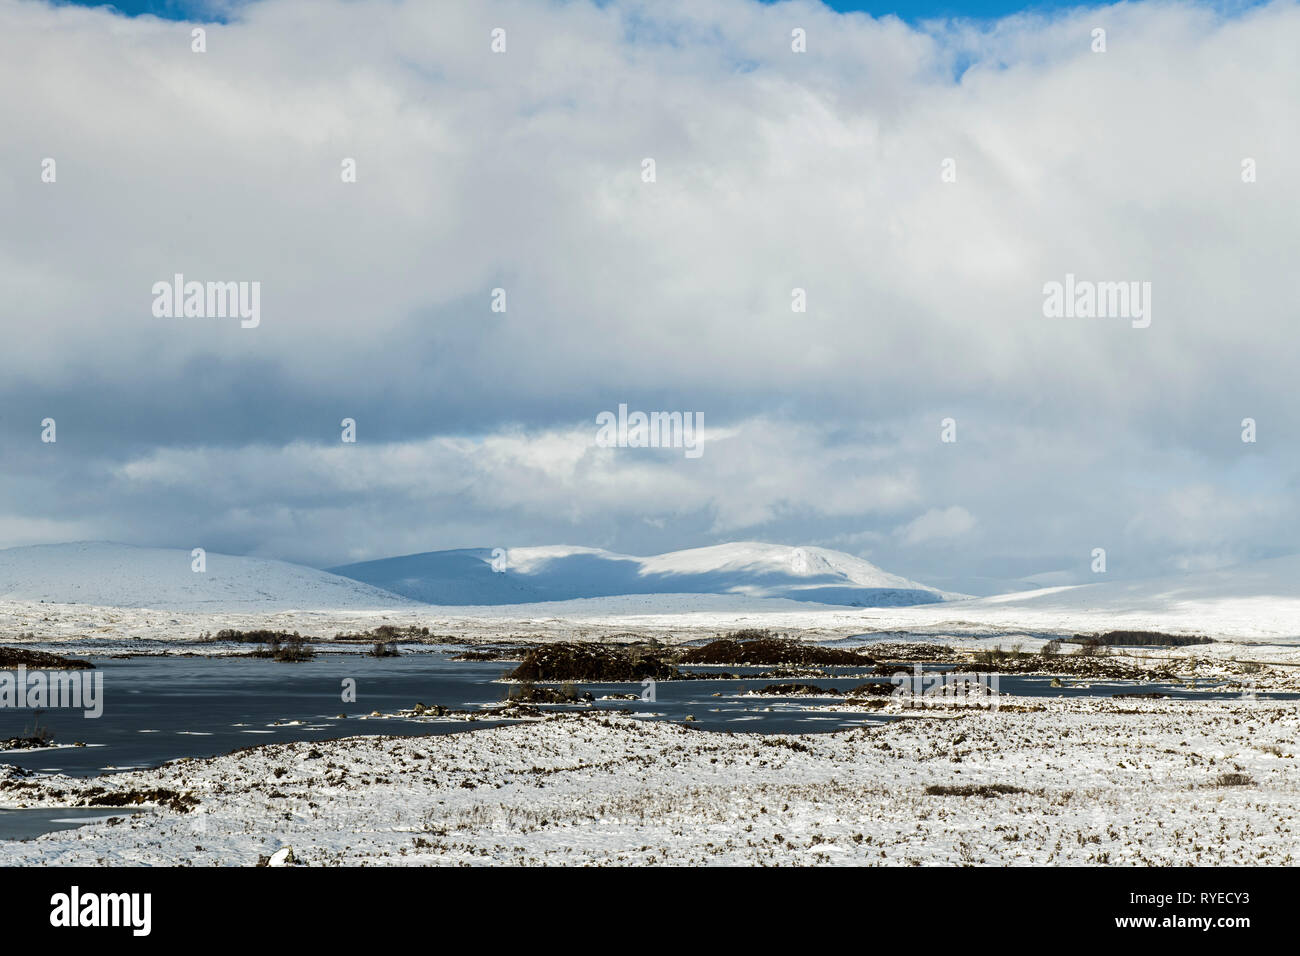 Rannoch Moor in the Scottish Highlands under snow in February. The photo shows snow covered mountains with cloud shadows on them. Stock Photo